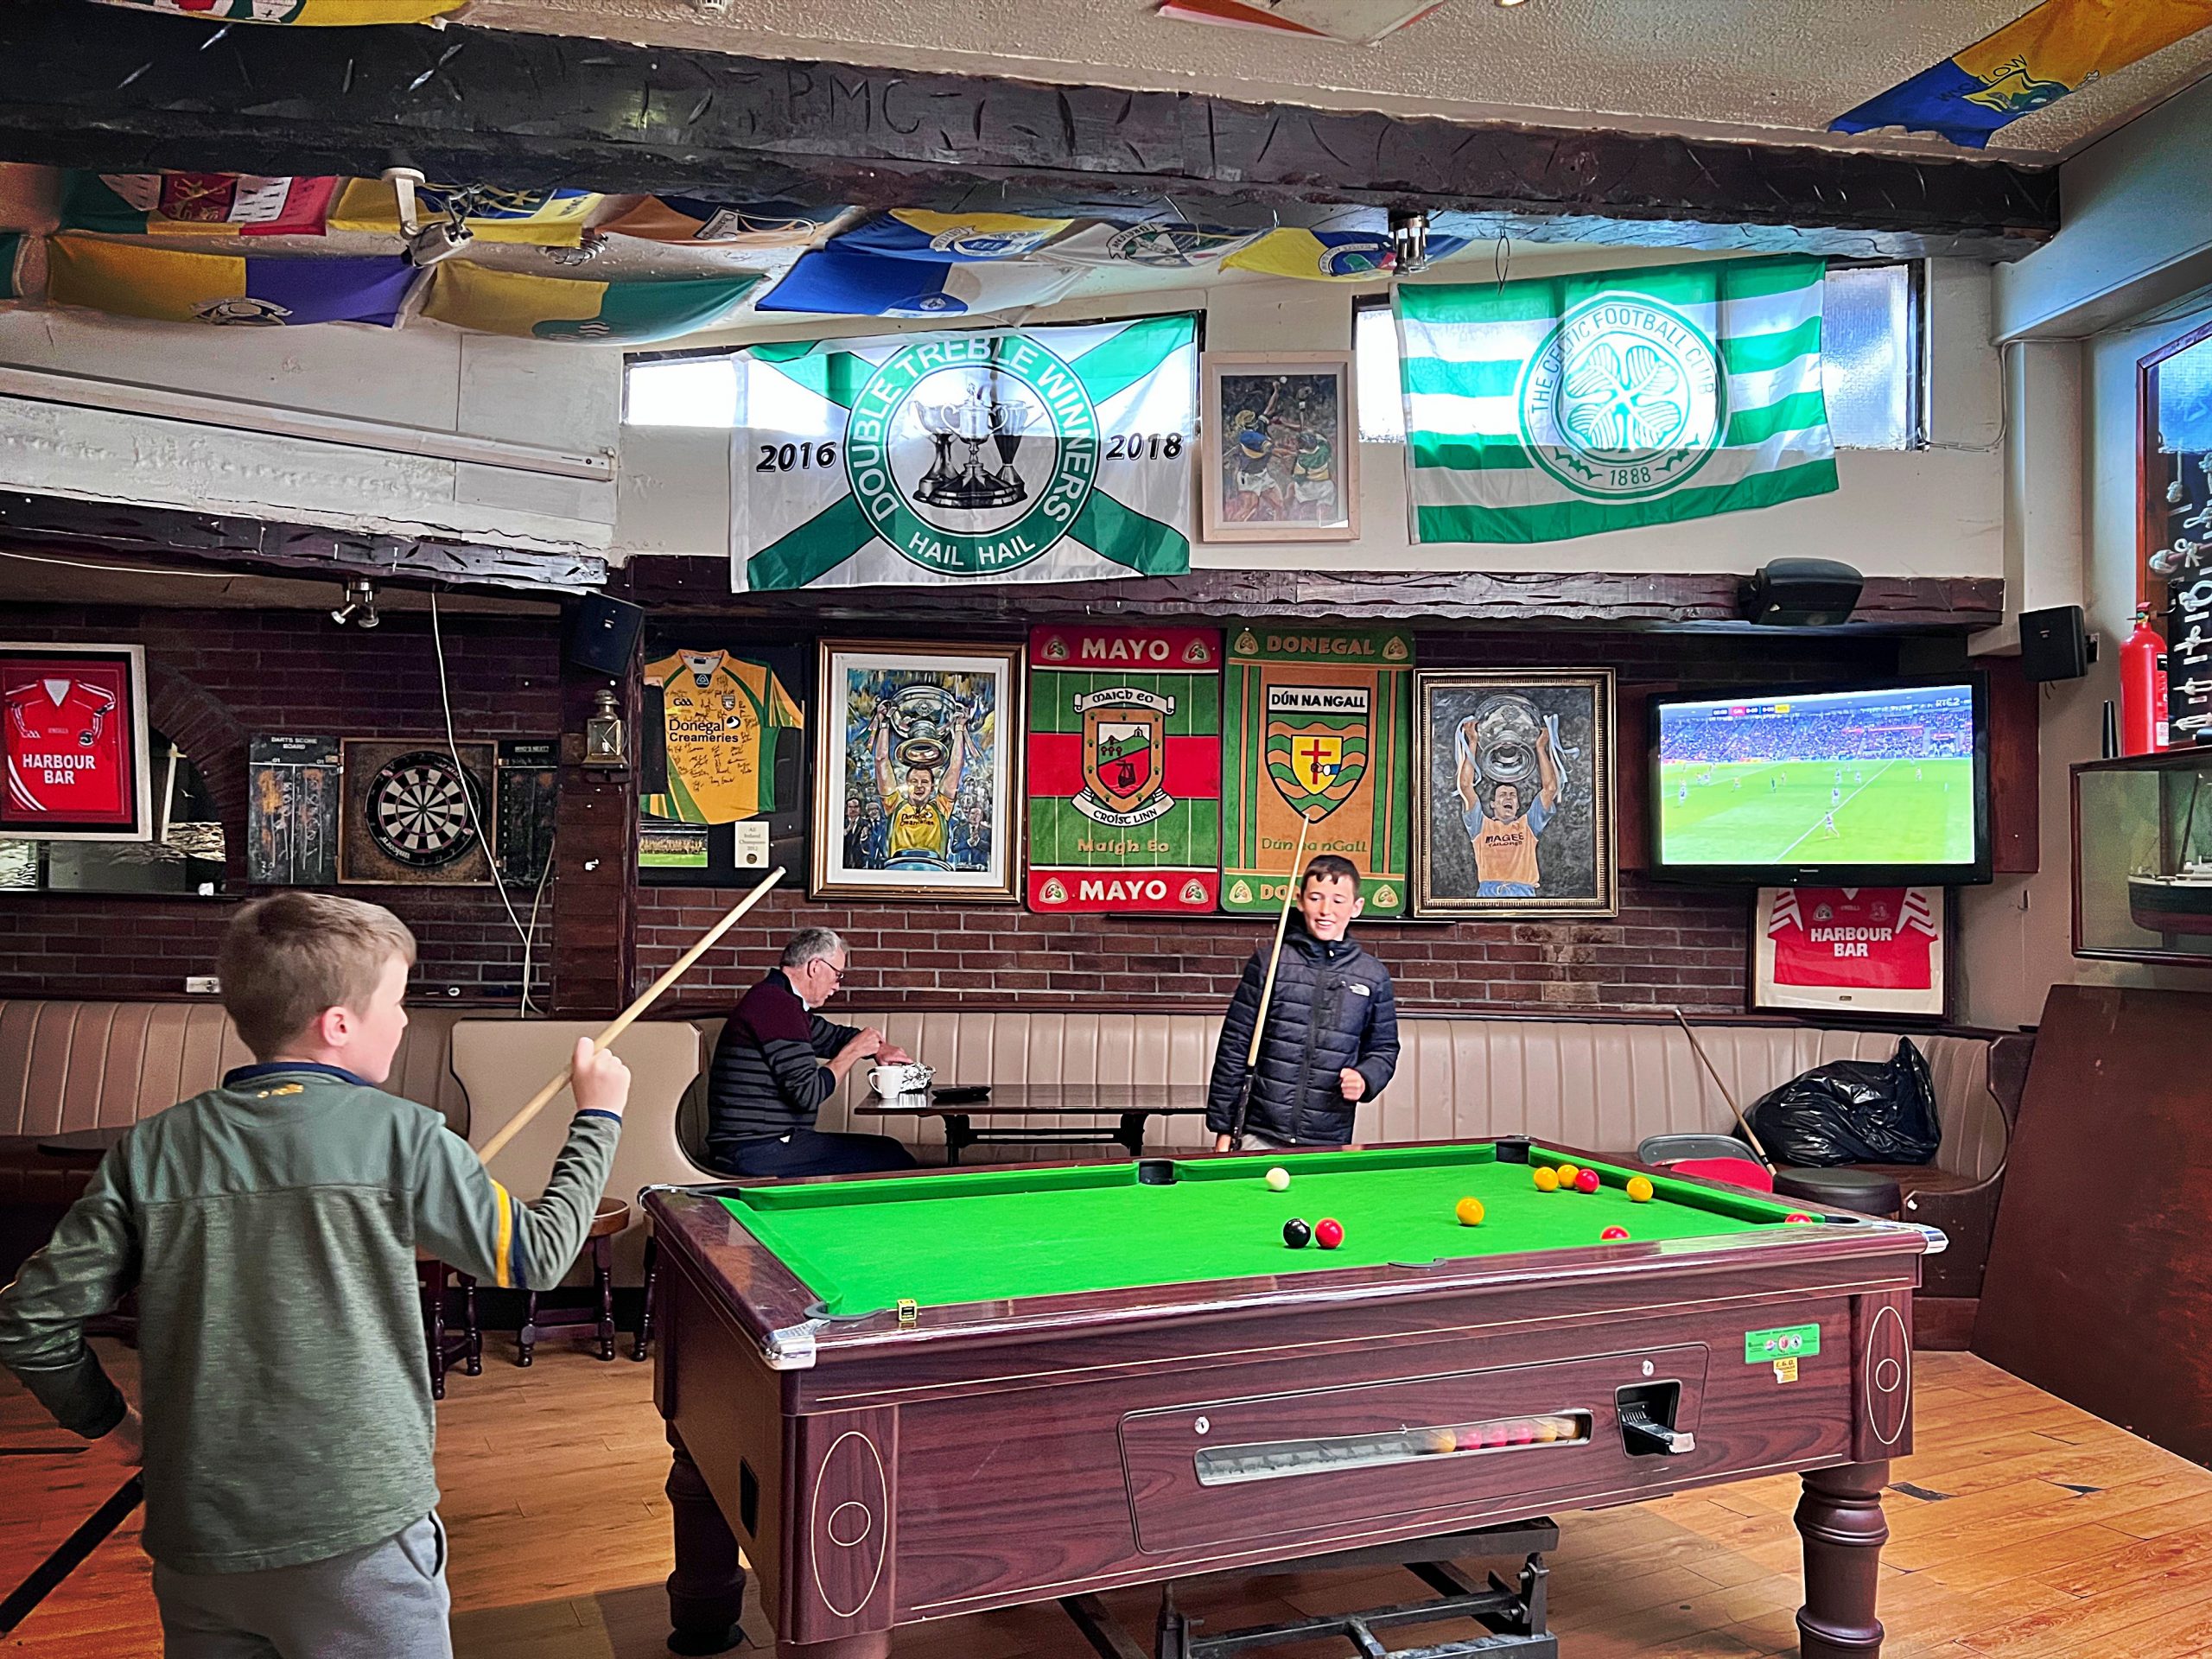 kids playing pool in a pub, Killybegs, Ireland, Pic:Kerstin Rodgers 